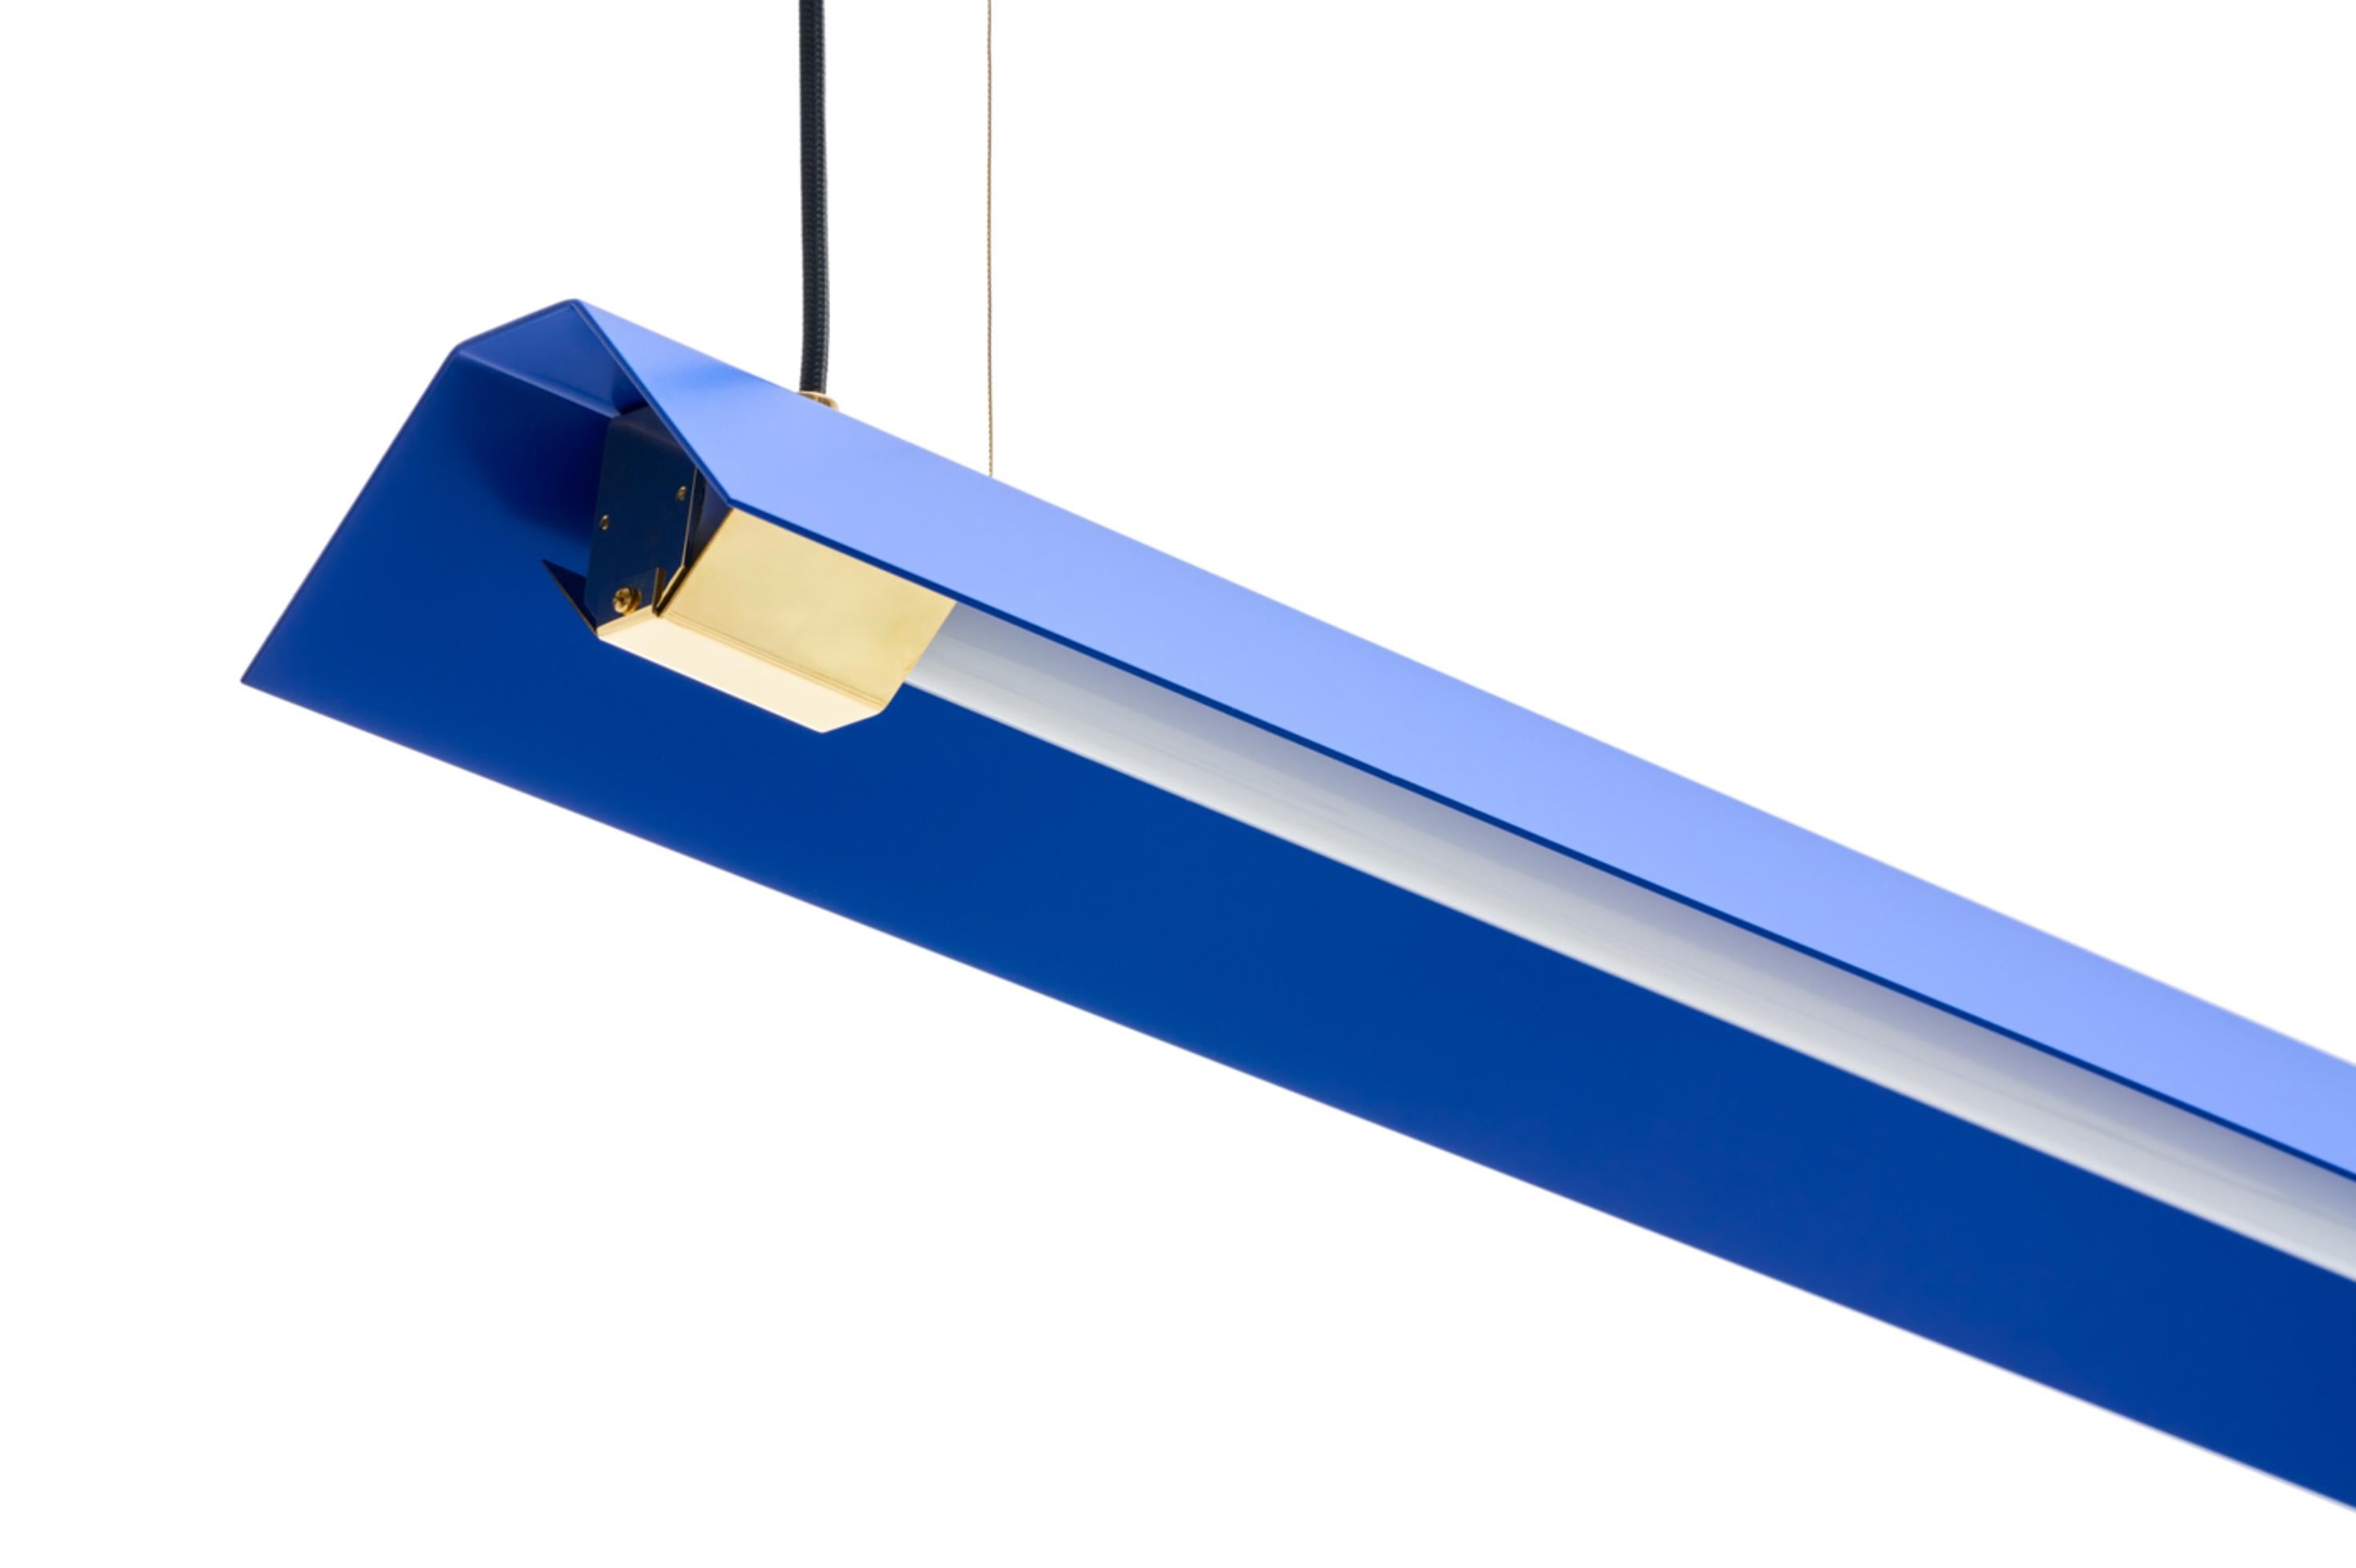 Medium misalliance ex ultramarine suspended light by lexavala
Dimensions: D 16 x W 100 x H 8 cm
Materials: powder coated shade with details made of brass or stainless steel.

There are two lenghts of socket covers, extending over the LED. Two